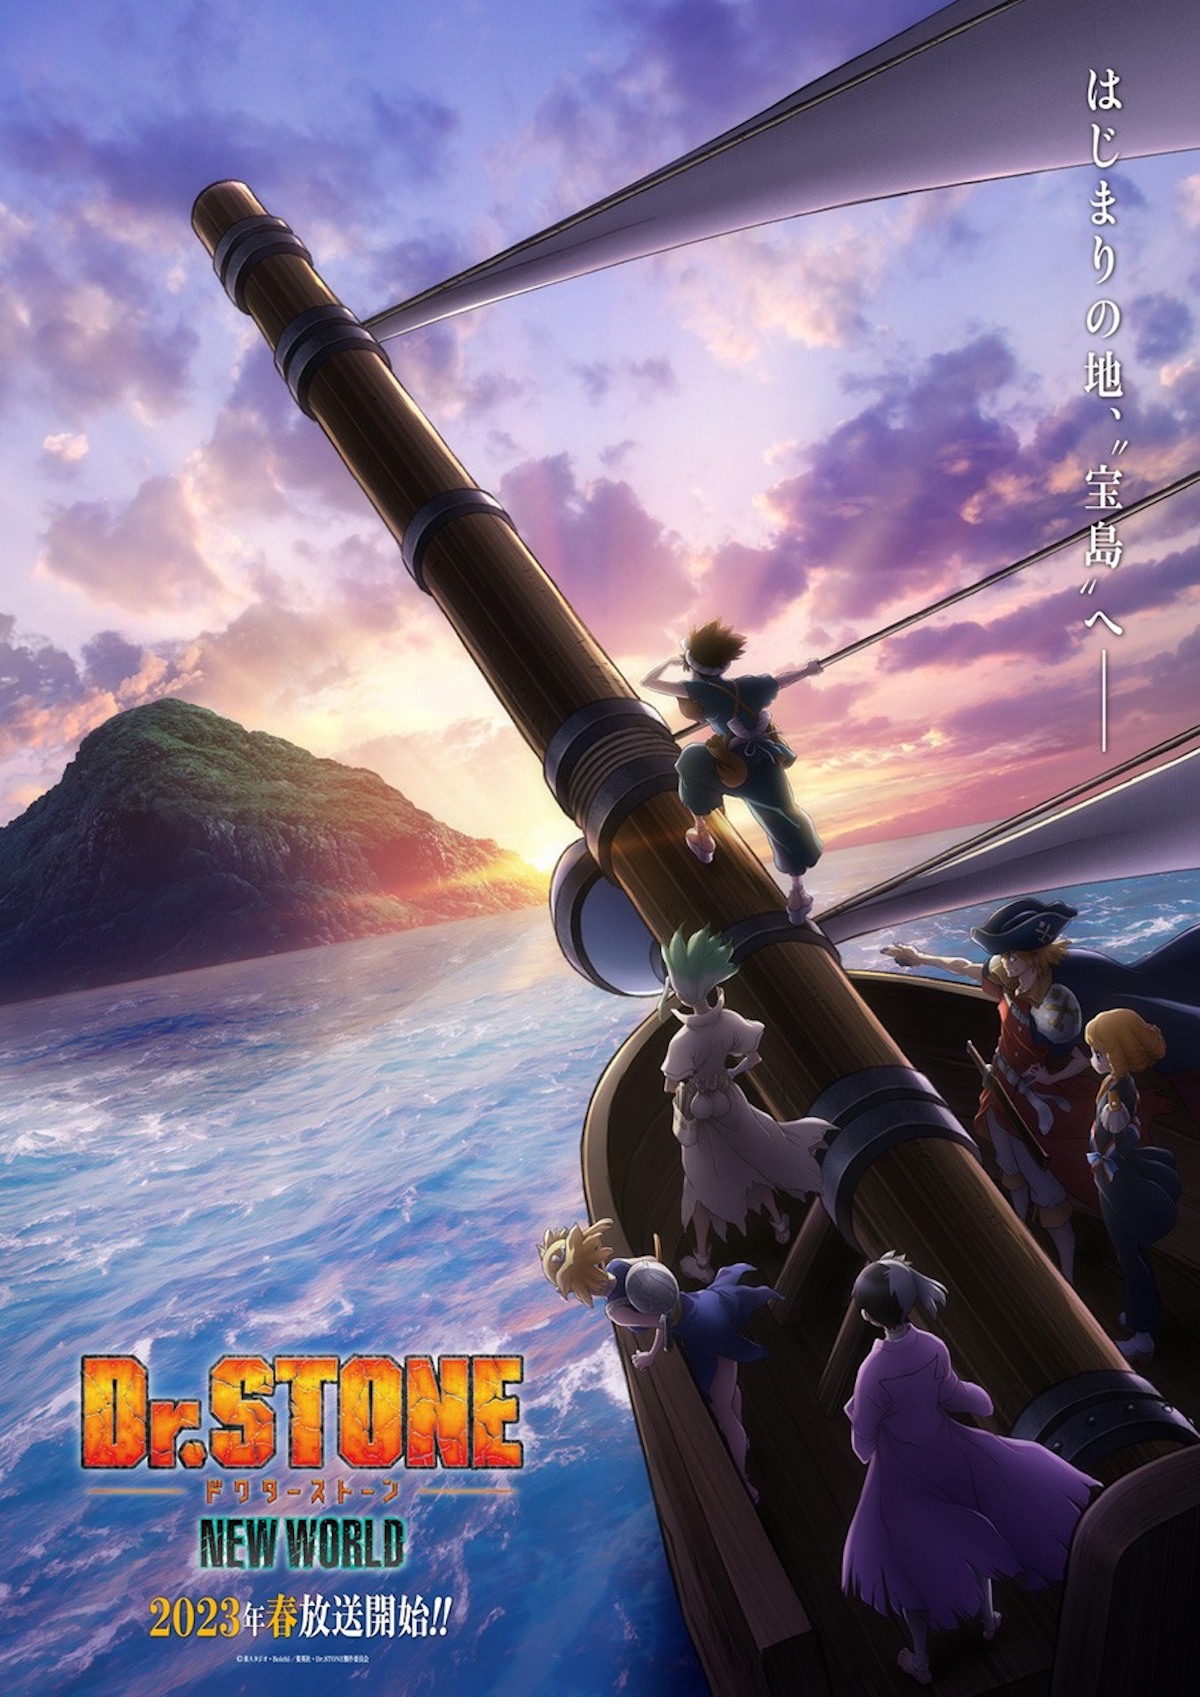 Dr. Stone: Season 3 Part 2 - Release Window, Story & What You Should Know